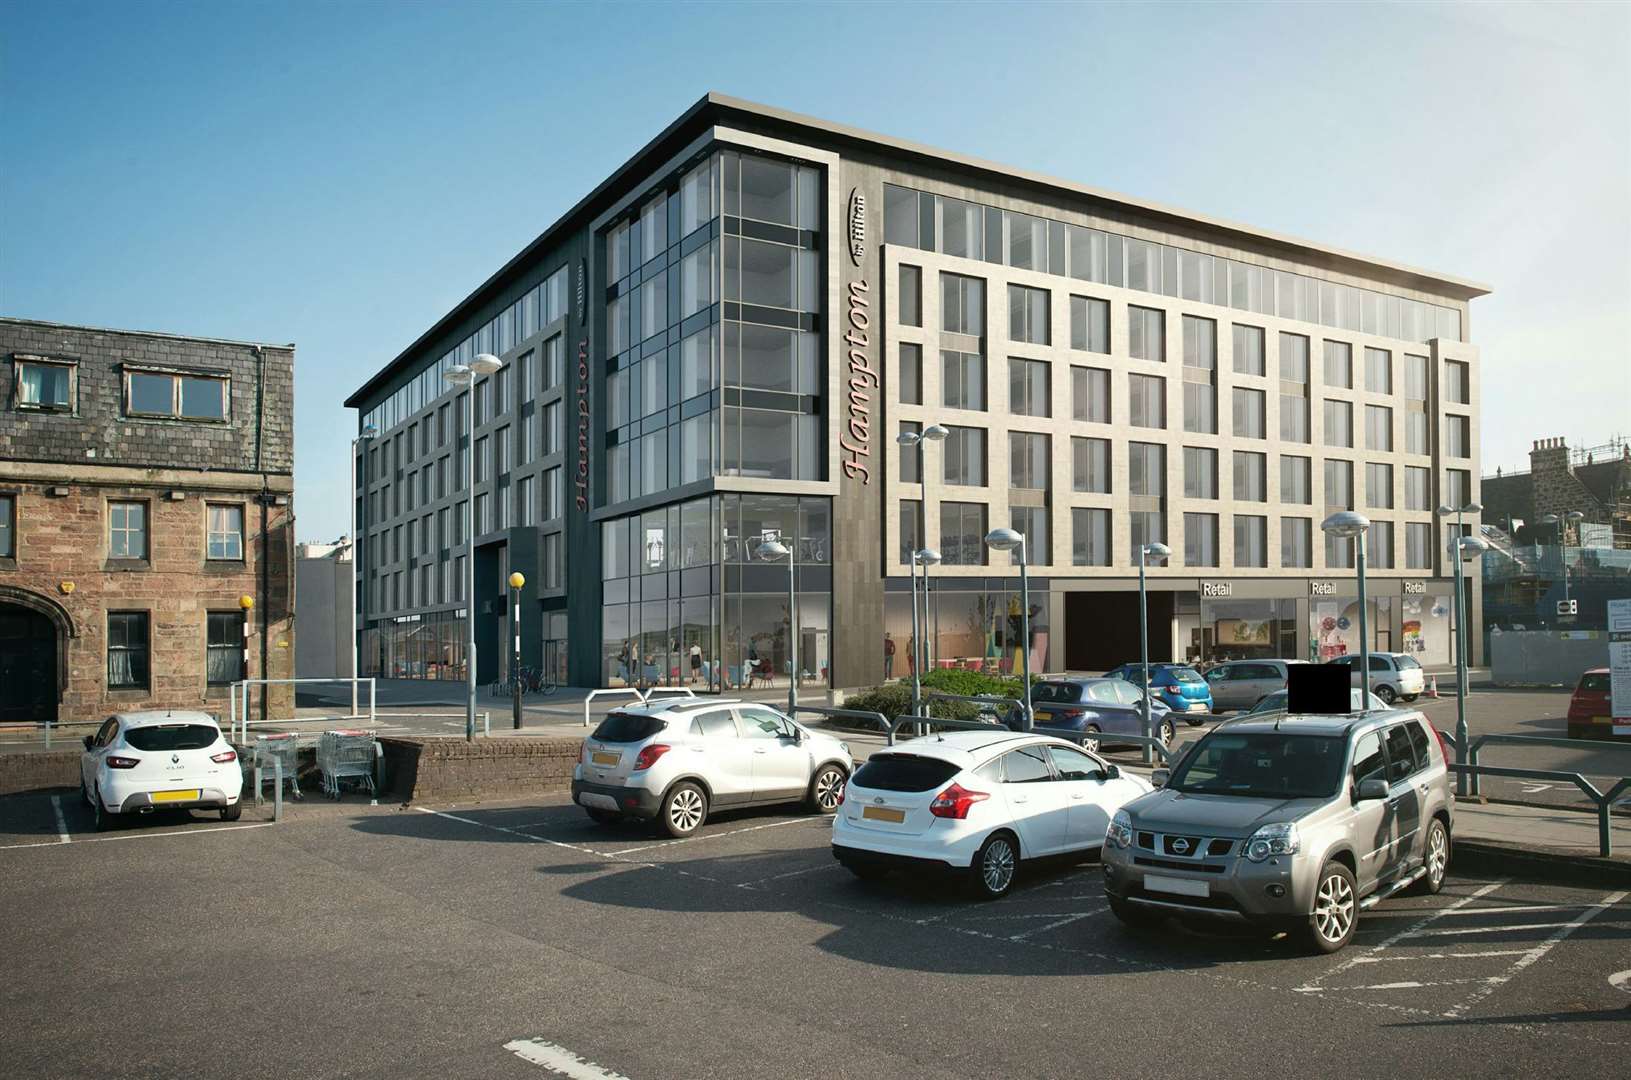 Artist's impression of the new hotel planned for the site of the two-storey car park in Rose Street.